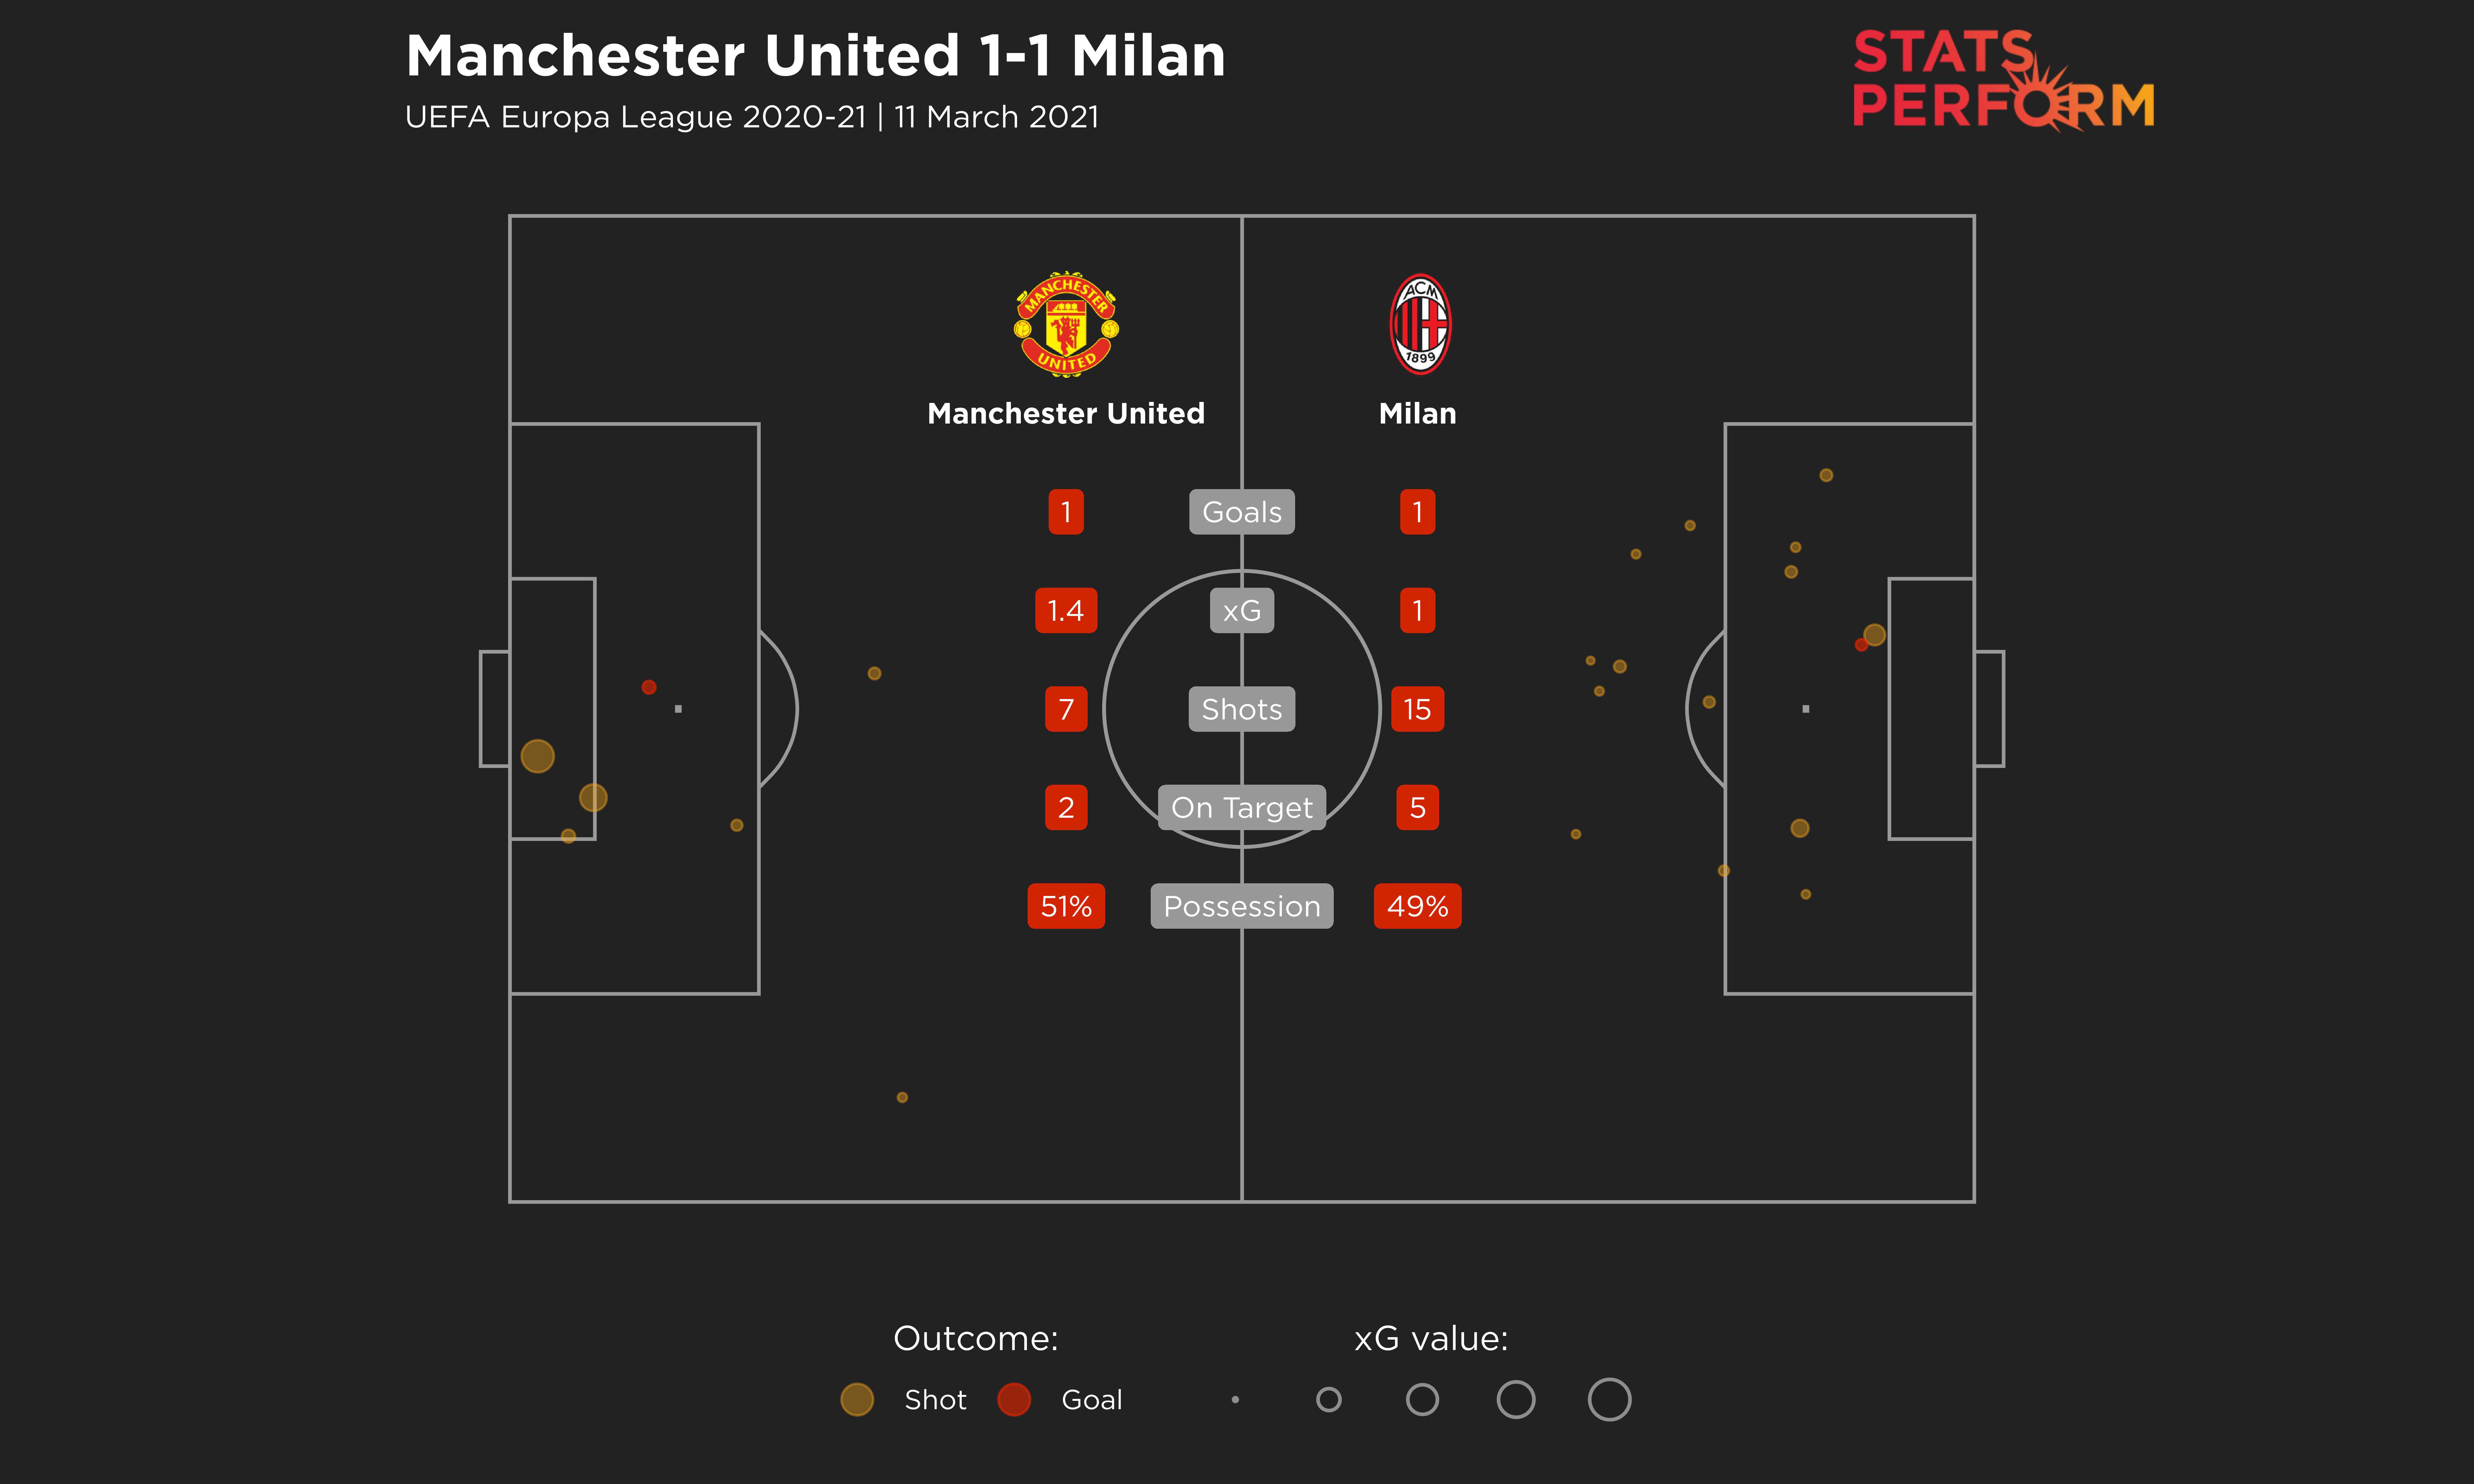 The first leg between Manchester United and Milan